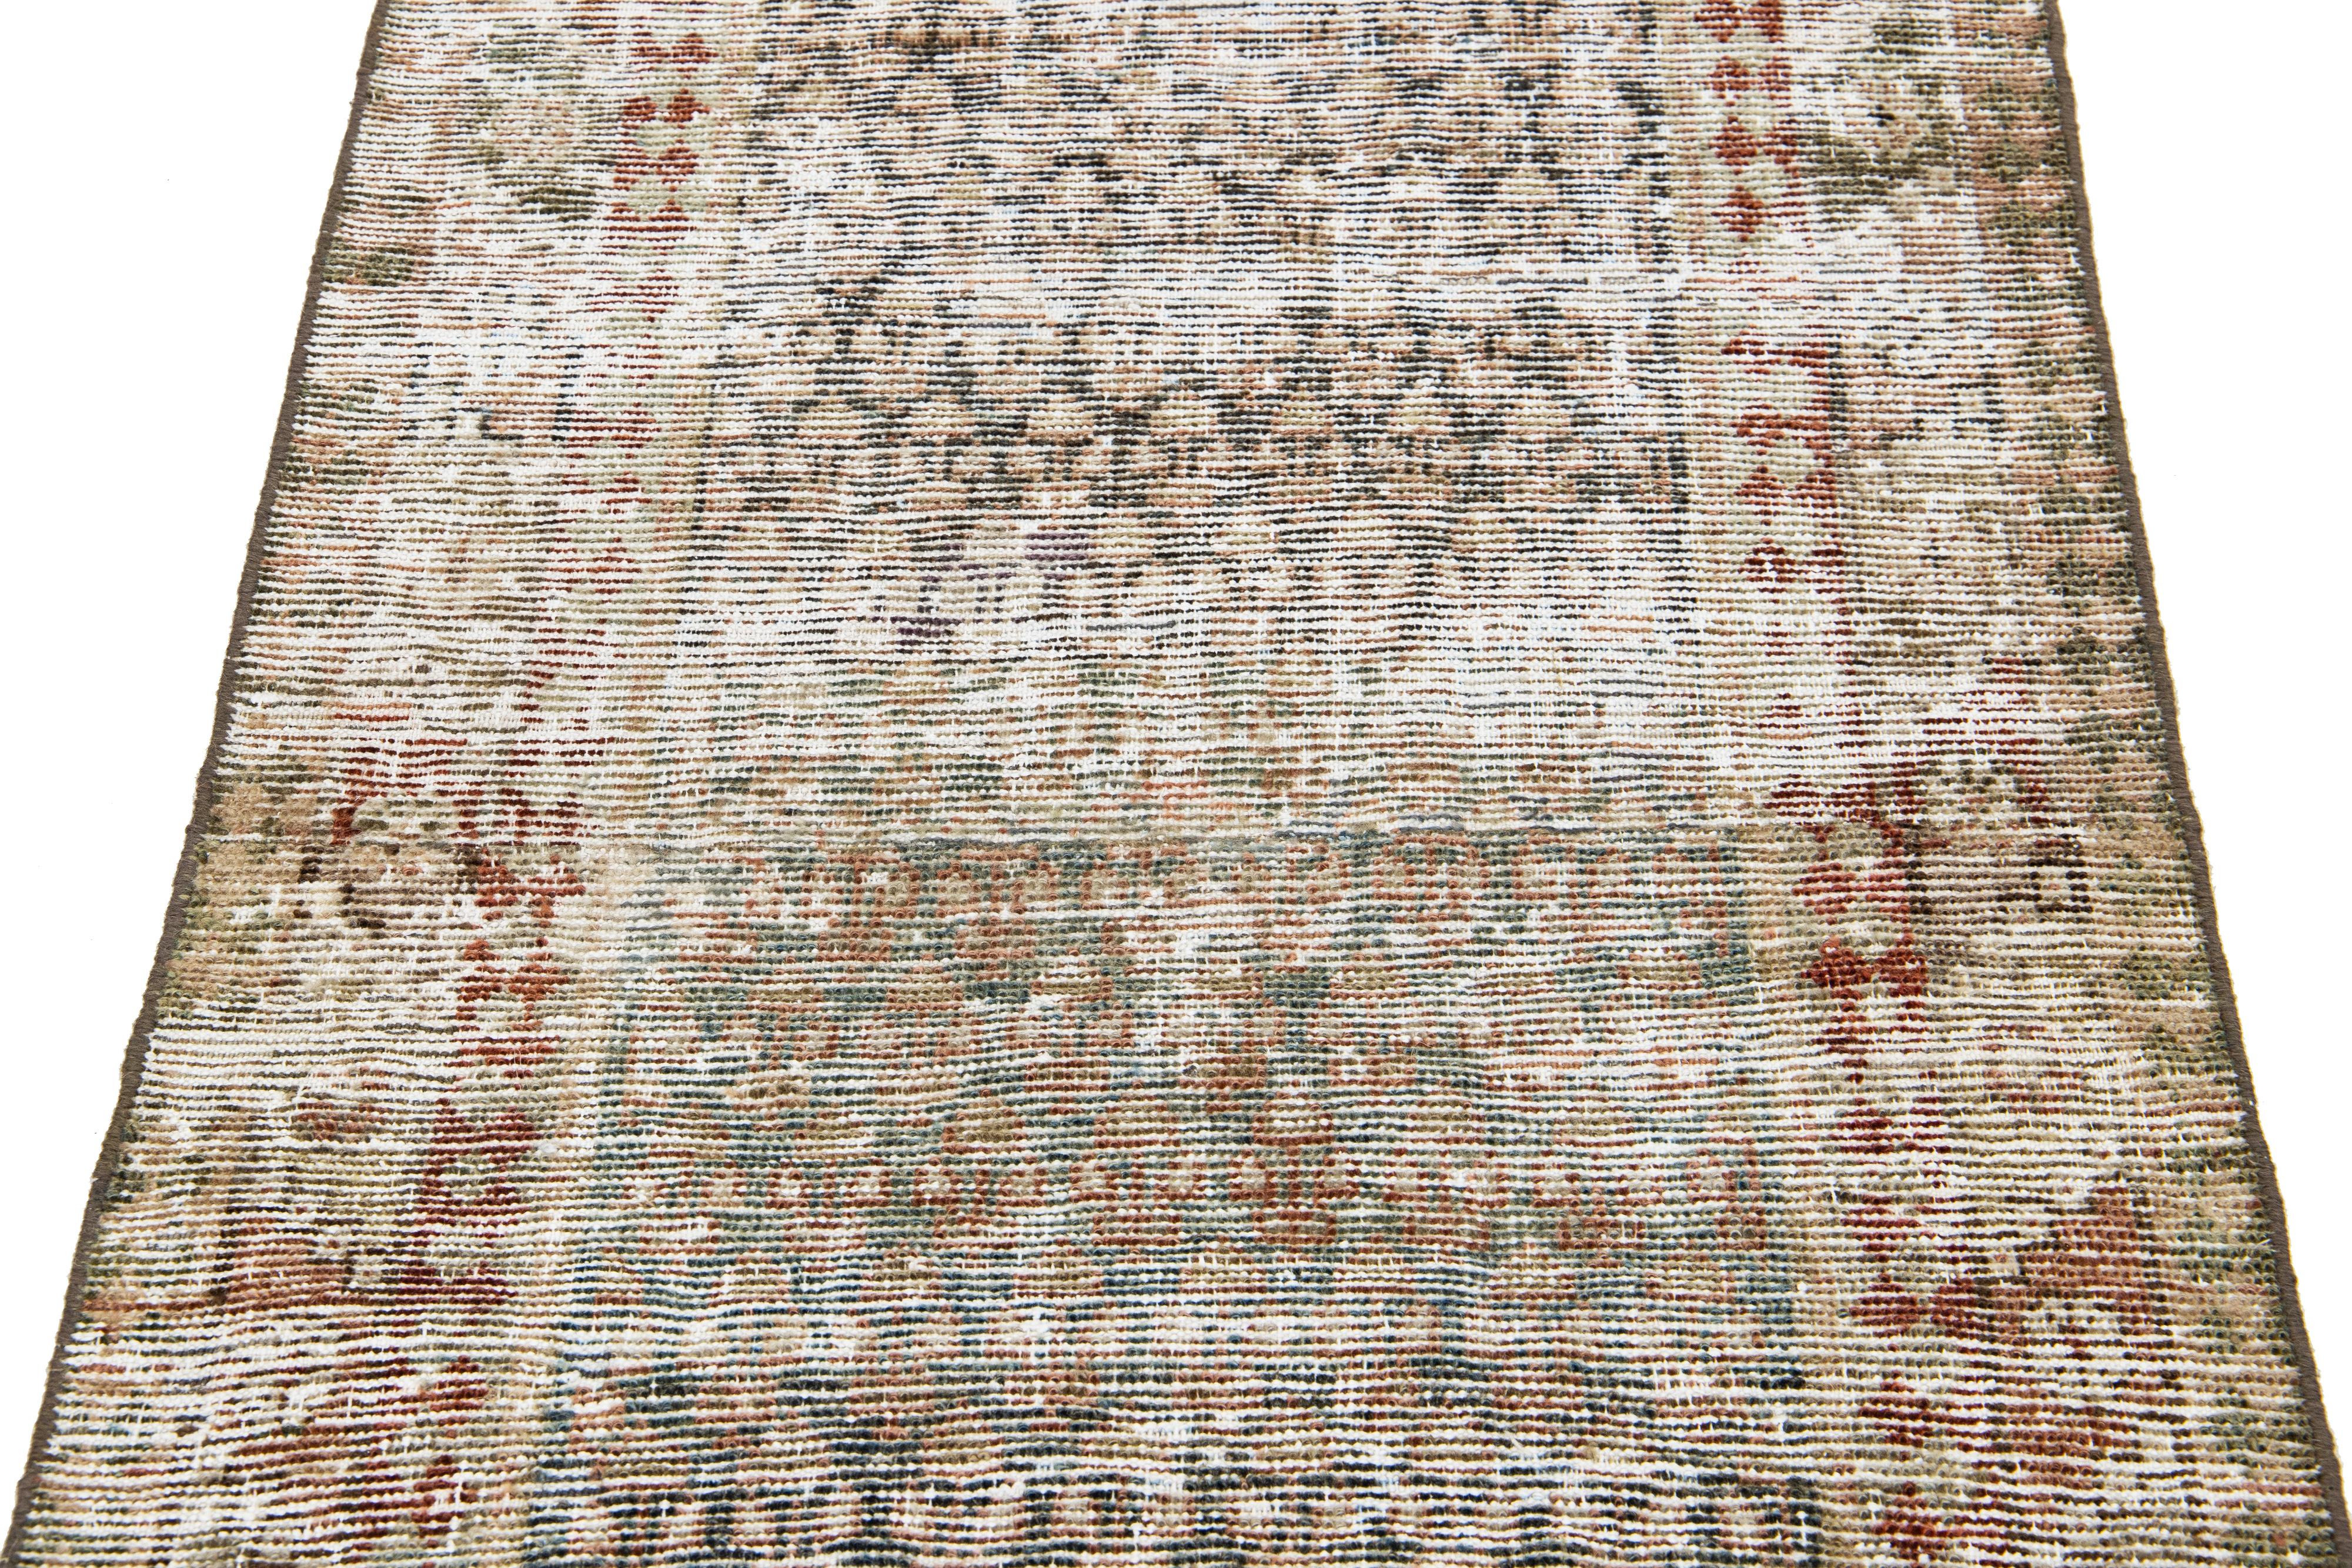 Blue Malayer Persian Wool Runner With Allover Motif From The 1900s For Sale 1